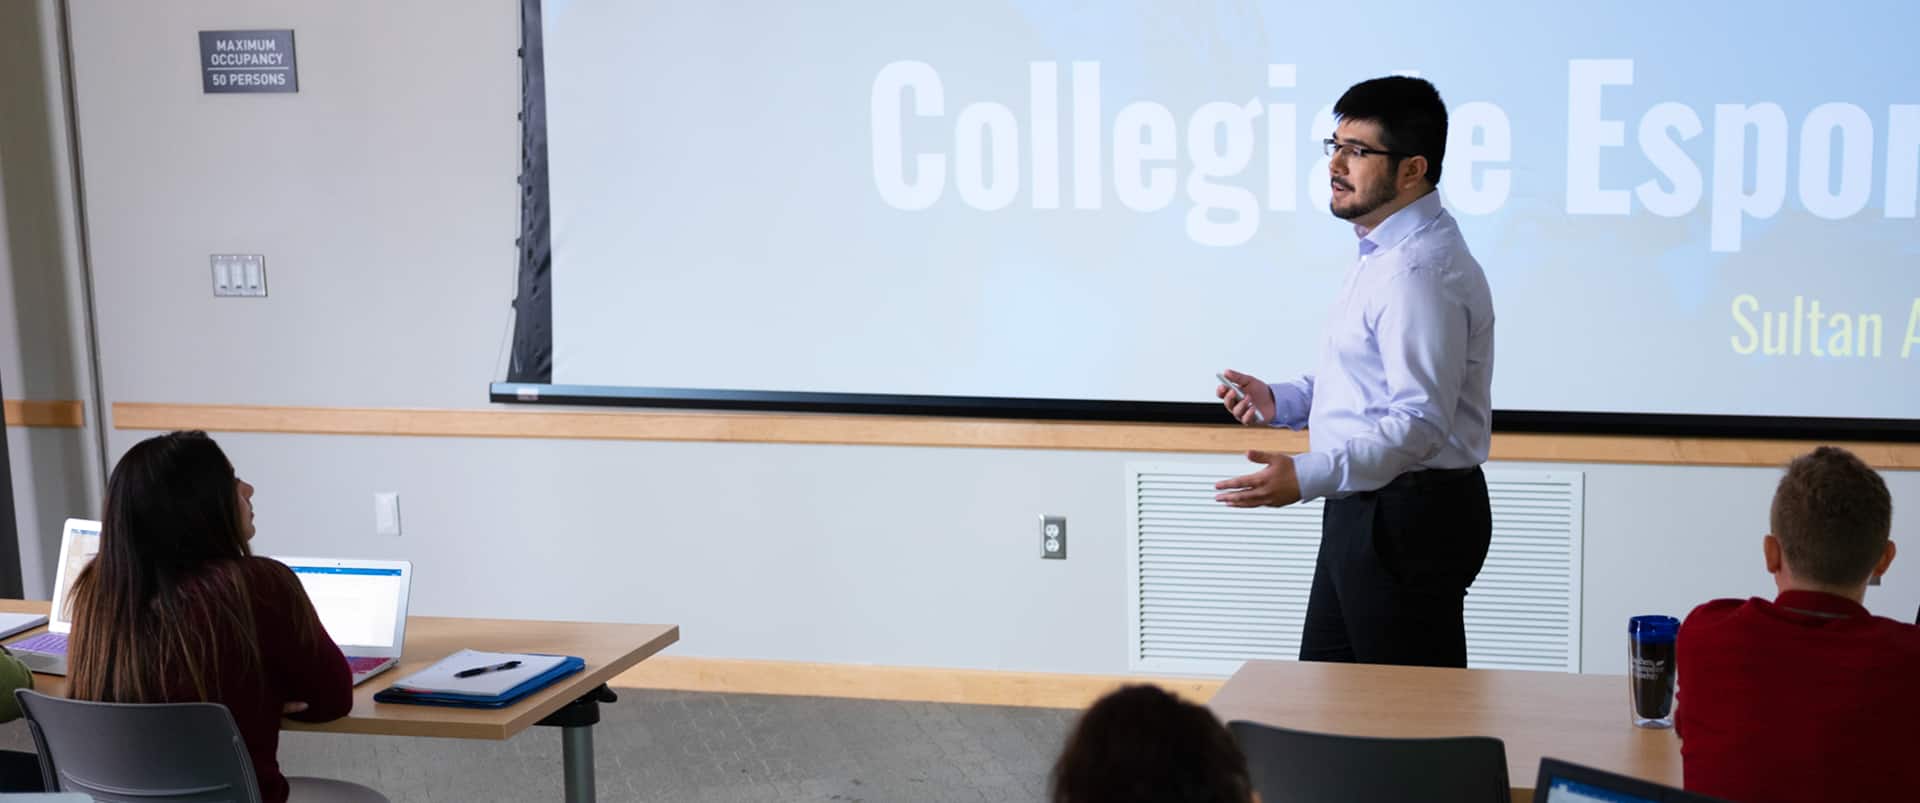 Sultan Ahktar, who earned a degree from SNHU in 2019, standing in front of a college classroom with a projector screen behind him reading Collegiate Esports.